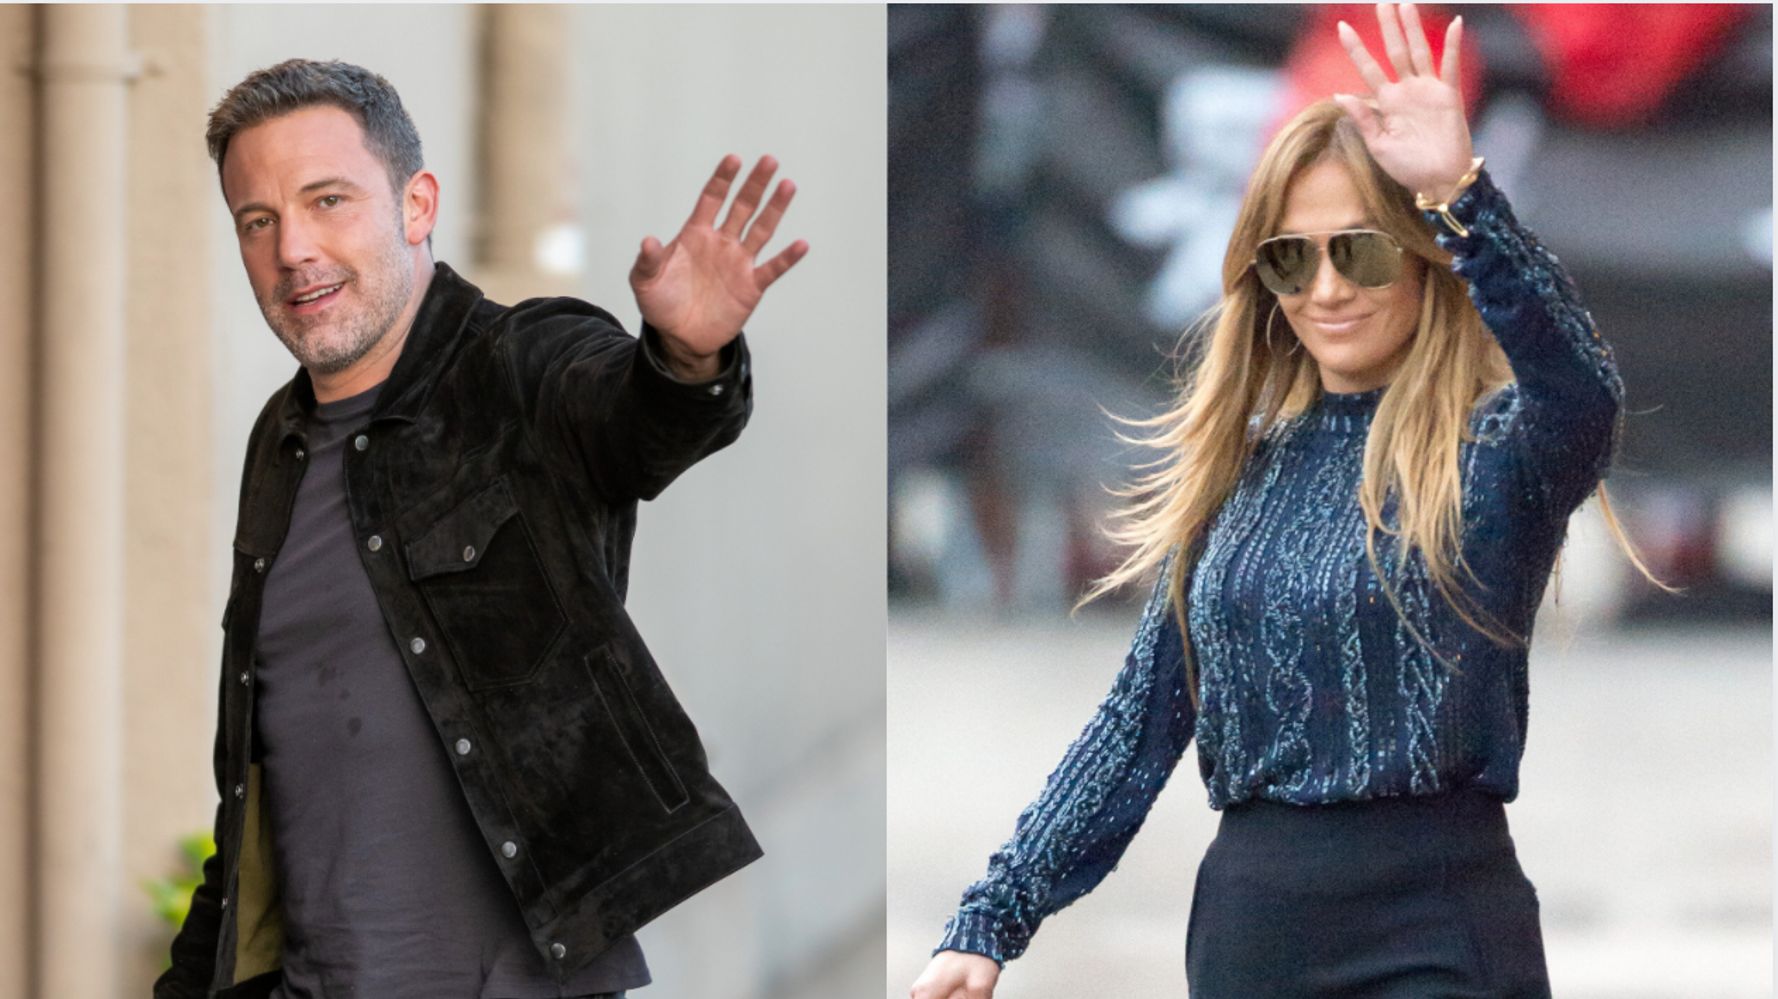 Jennifer Lopez And Ben Affleck Reportedly Took Their Maybe Romance On Vacation